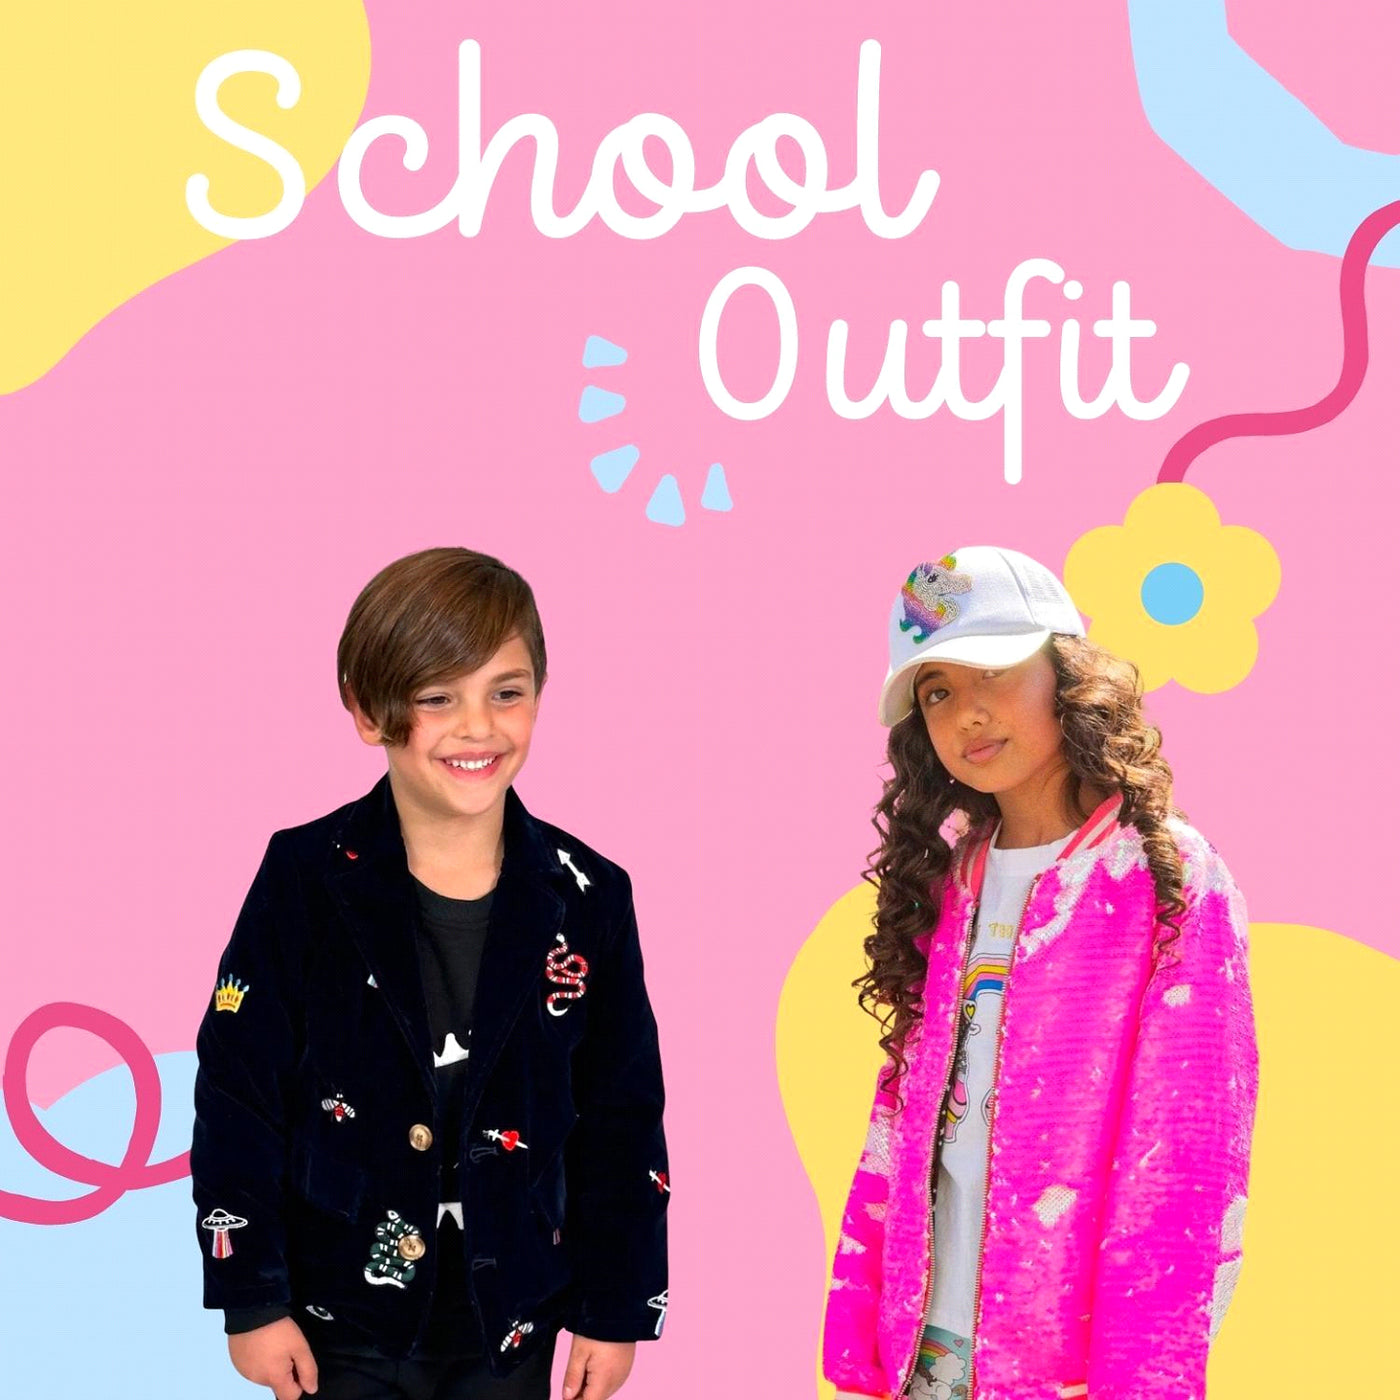 How To Look Cool at School - 5 Cute Outfit Ideas